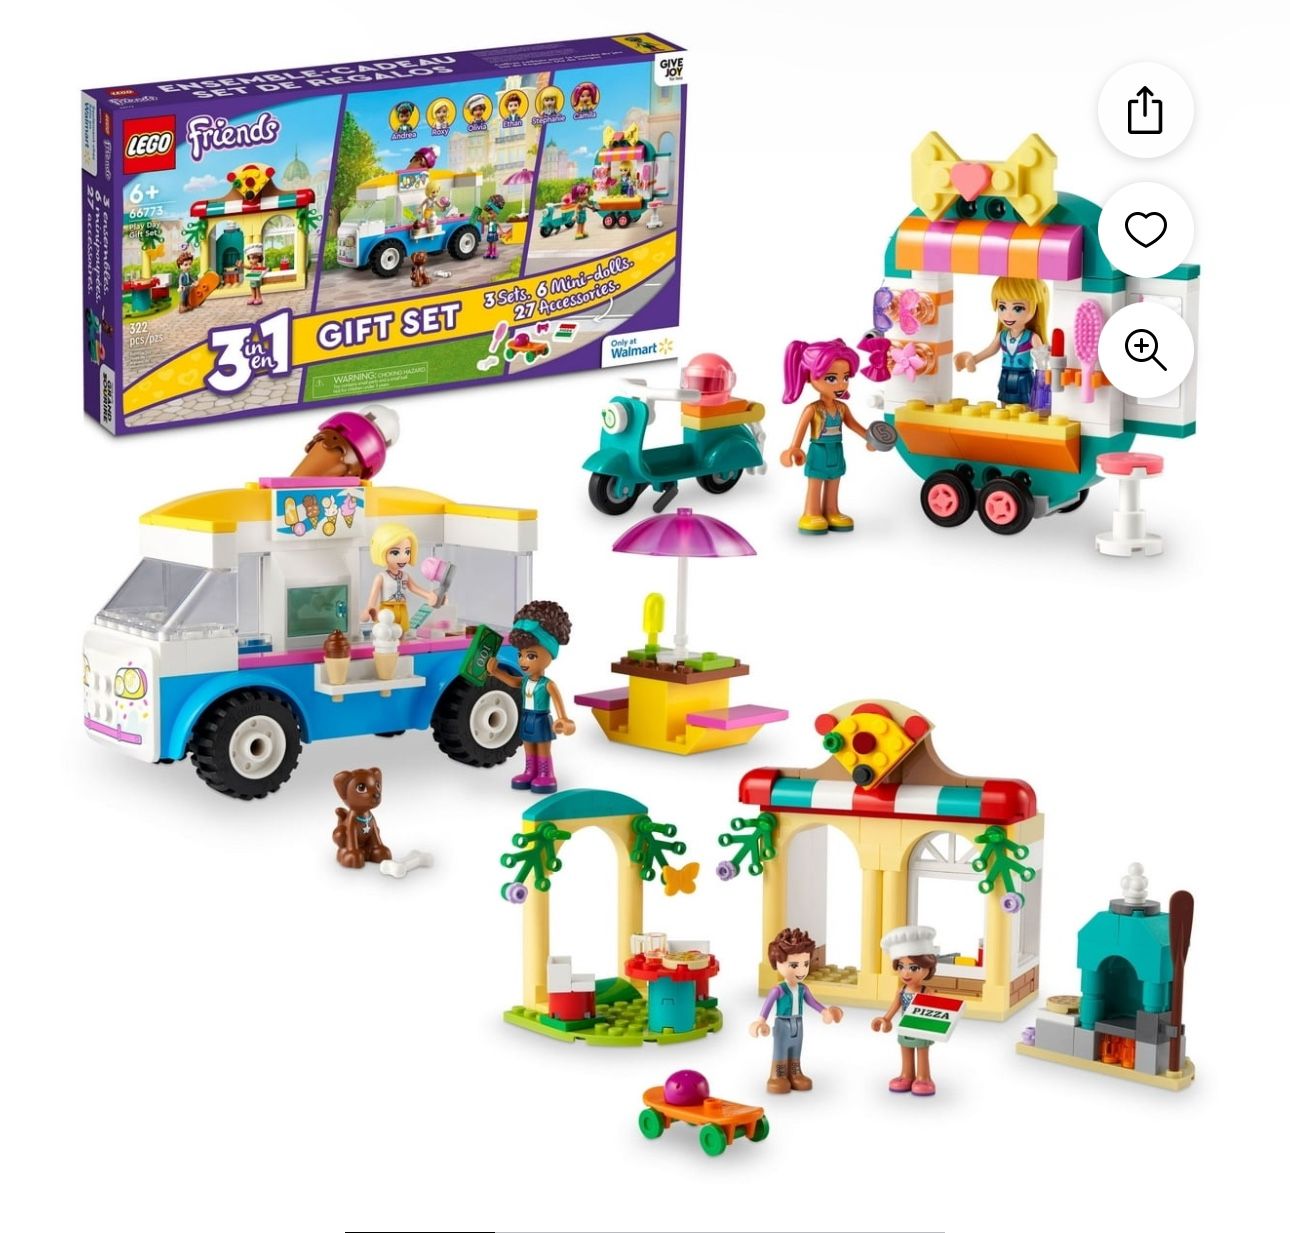 LEGO Friends Play Day Gift Set, 3in1 Building Set, Toy for 6+ Year Old Girls and Boys, Includes Ice Cream Truck, Mobile Fashion Boutique, and Pizzeria